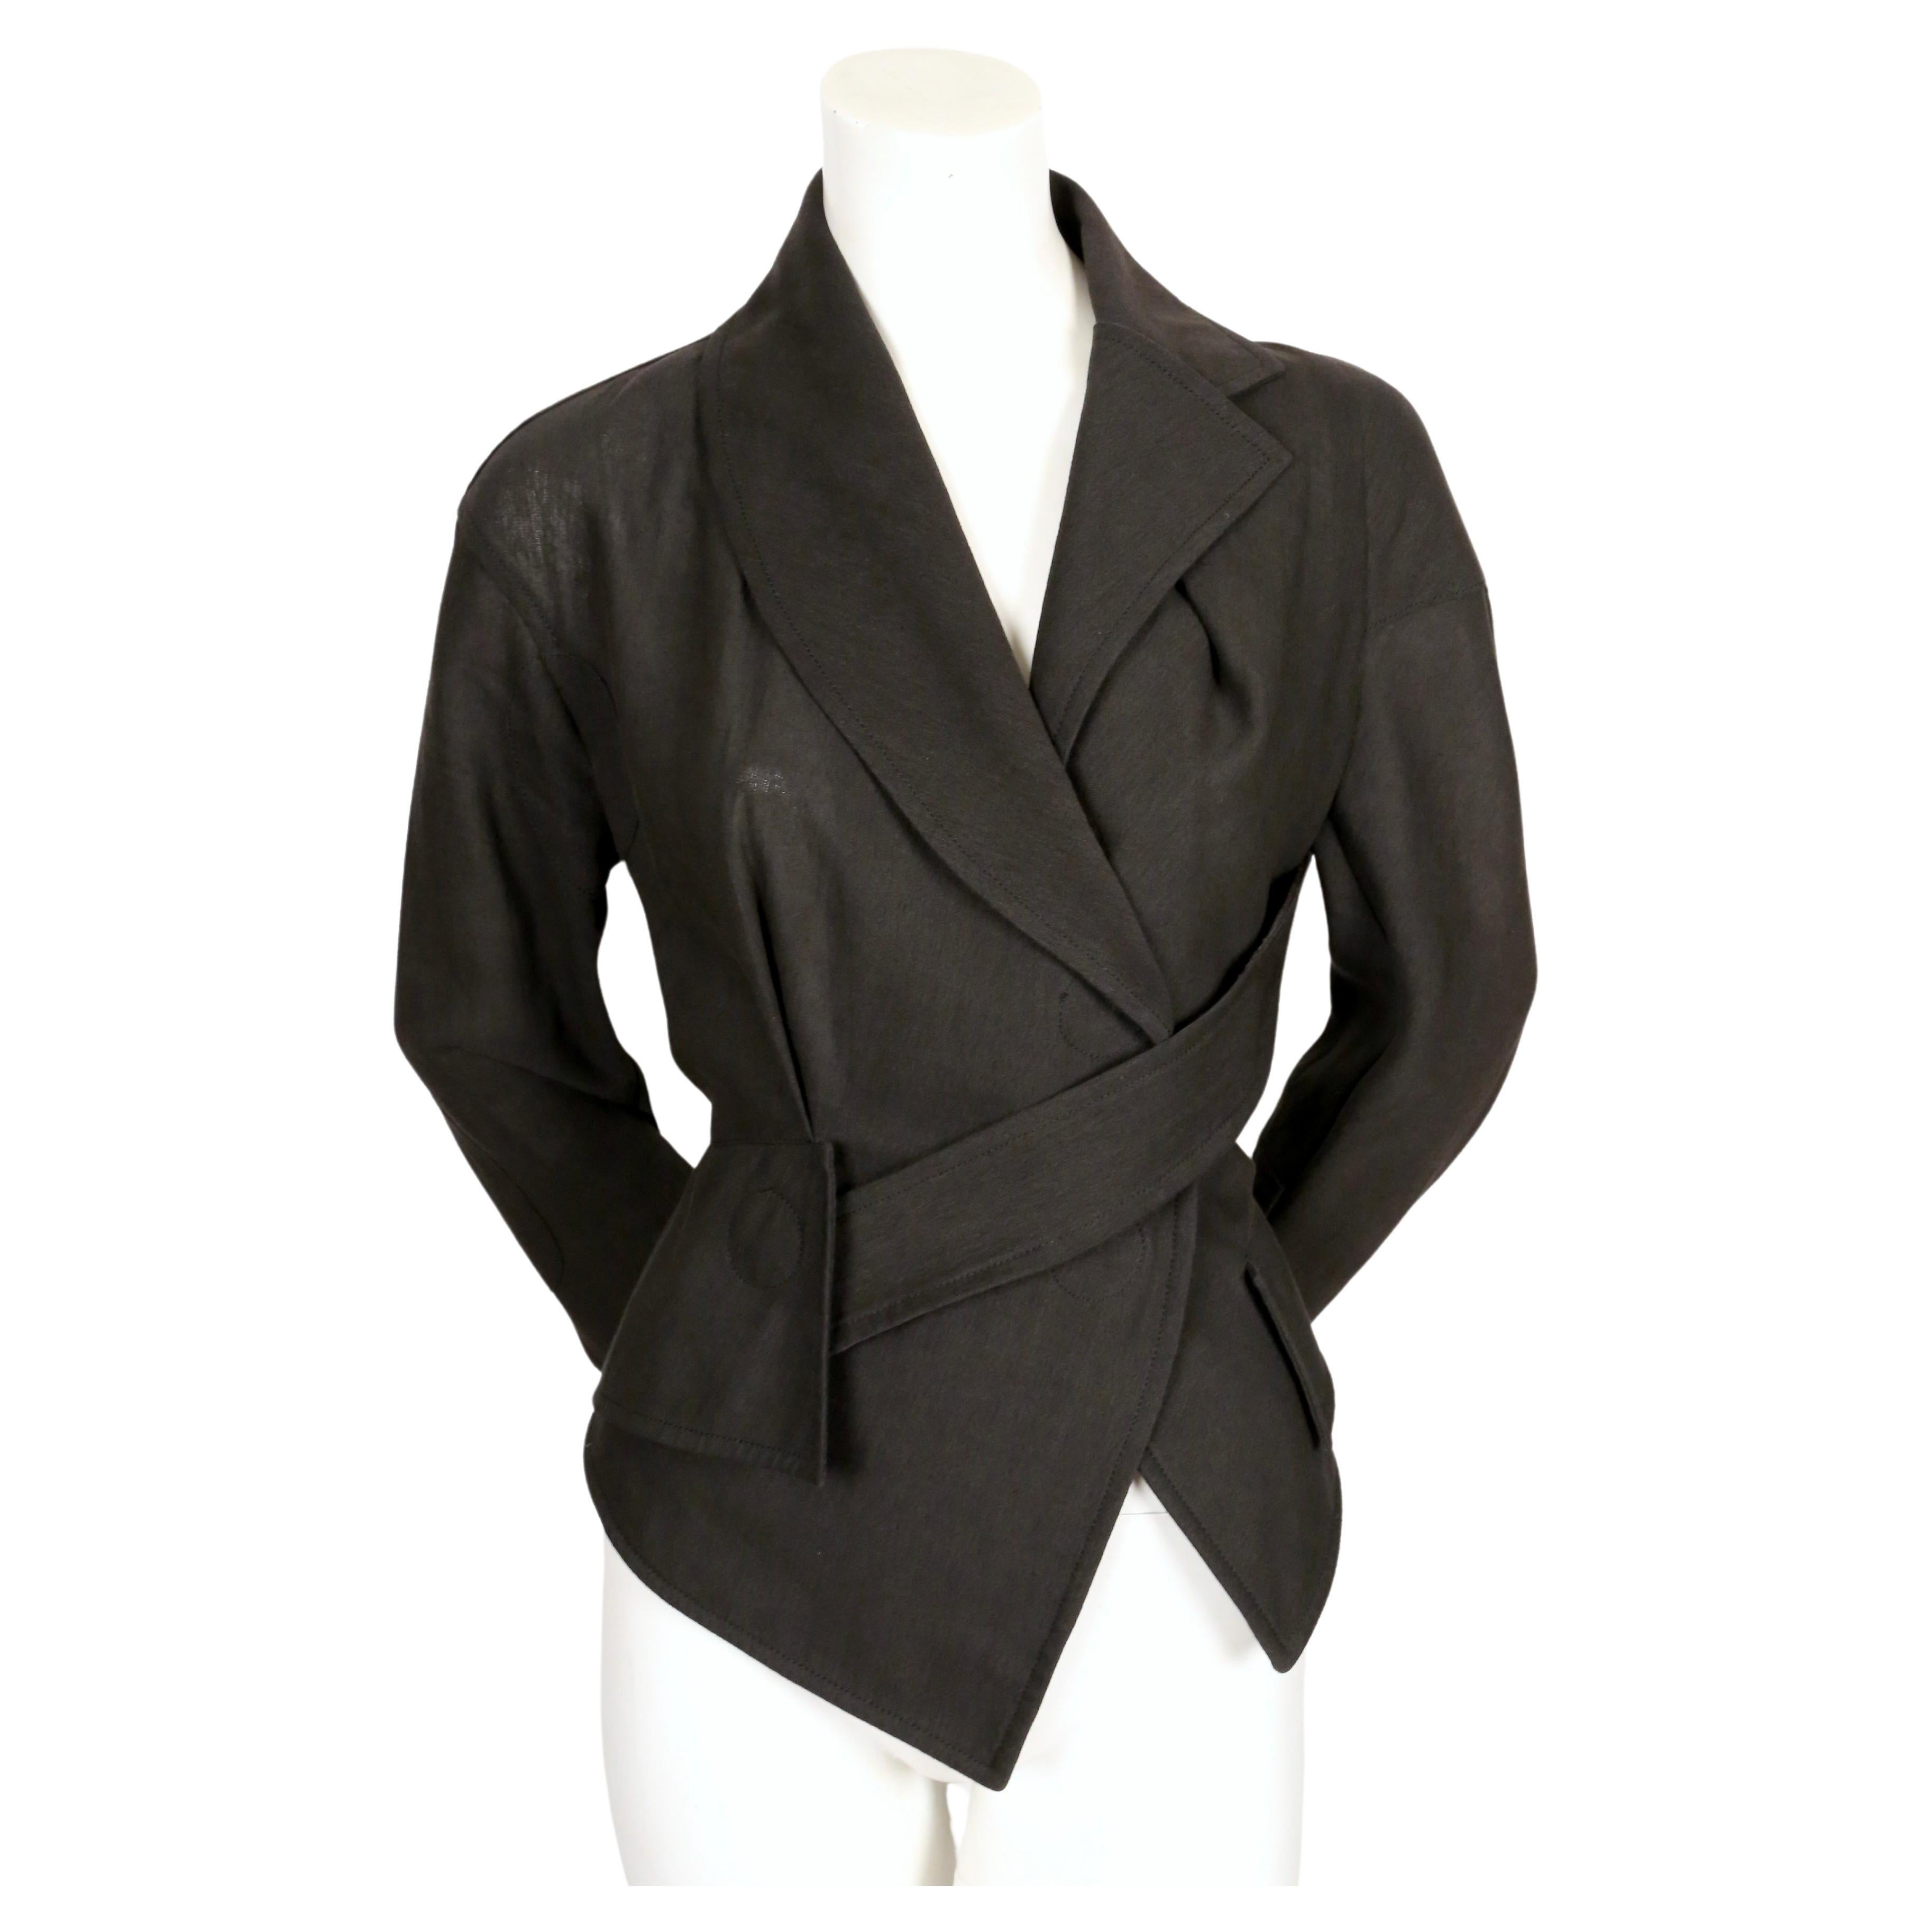 Very rare, black, linen jacket designed by Vivienne Westwood dating to the 1990's. Vivienne Westwood gold label which was her top range with very limited numbers made. 

Labeled a UK size 14 which fits small and is best fits a modern US 6-8.